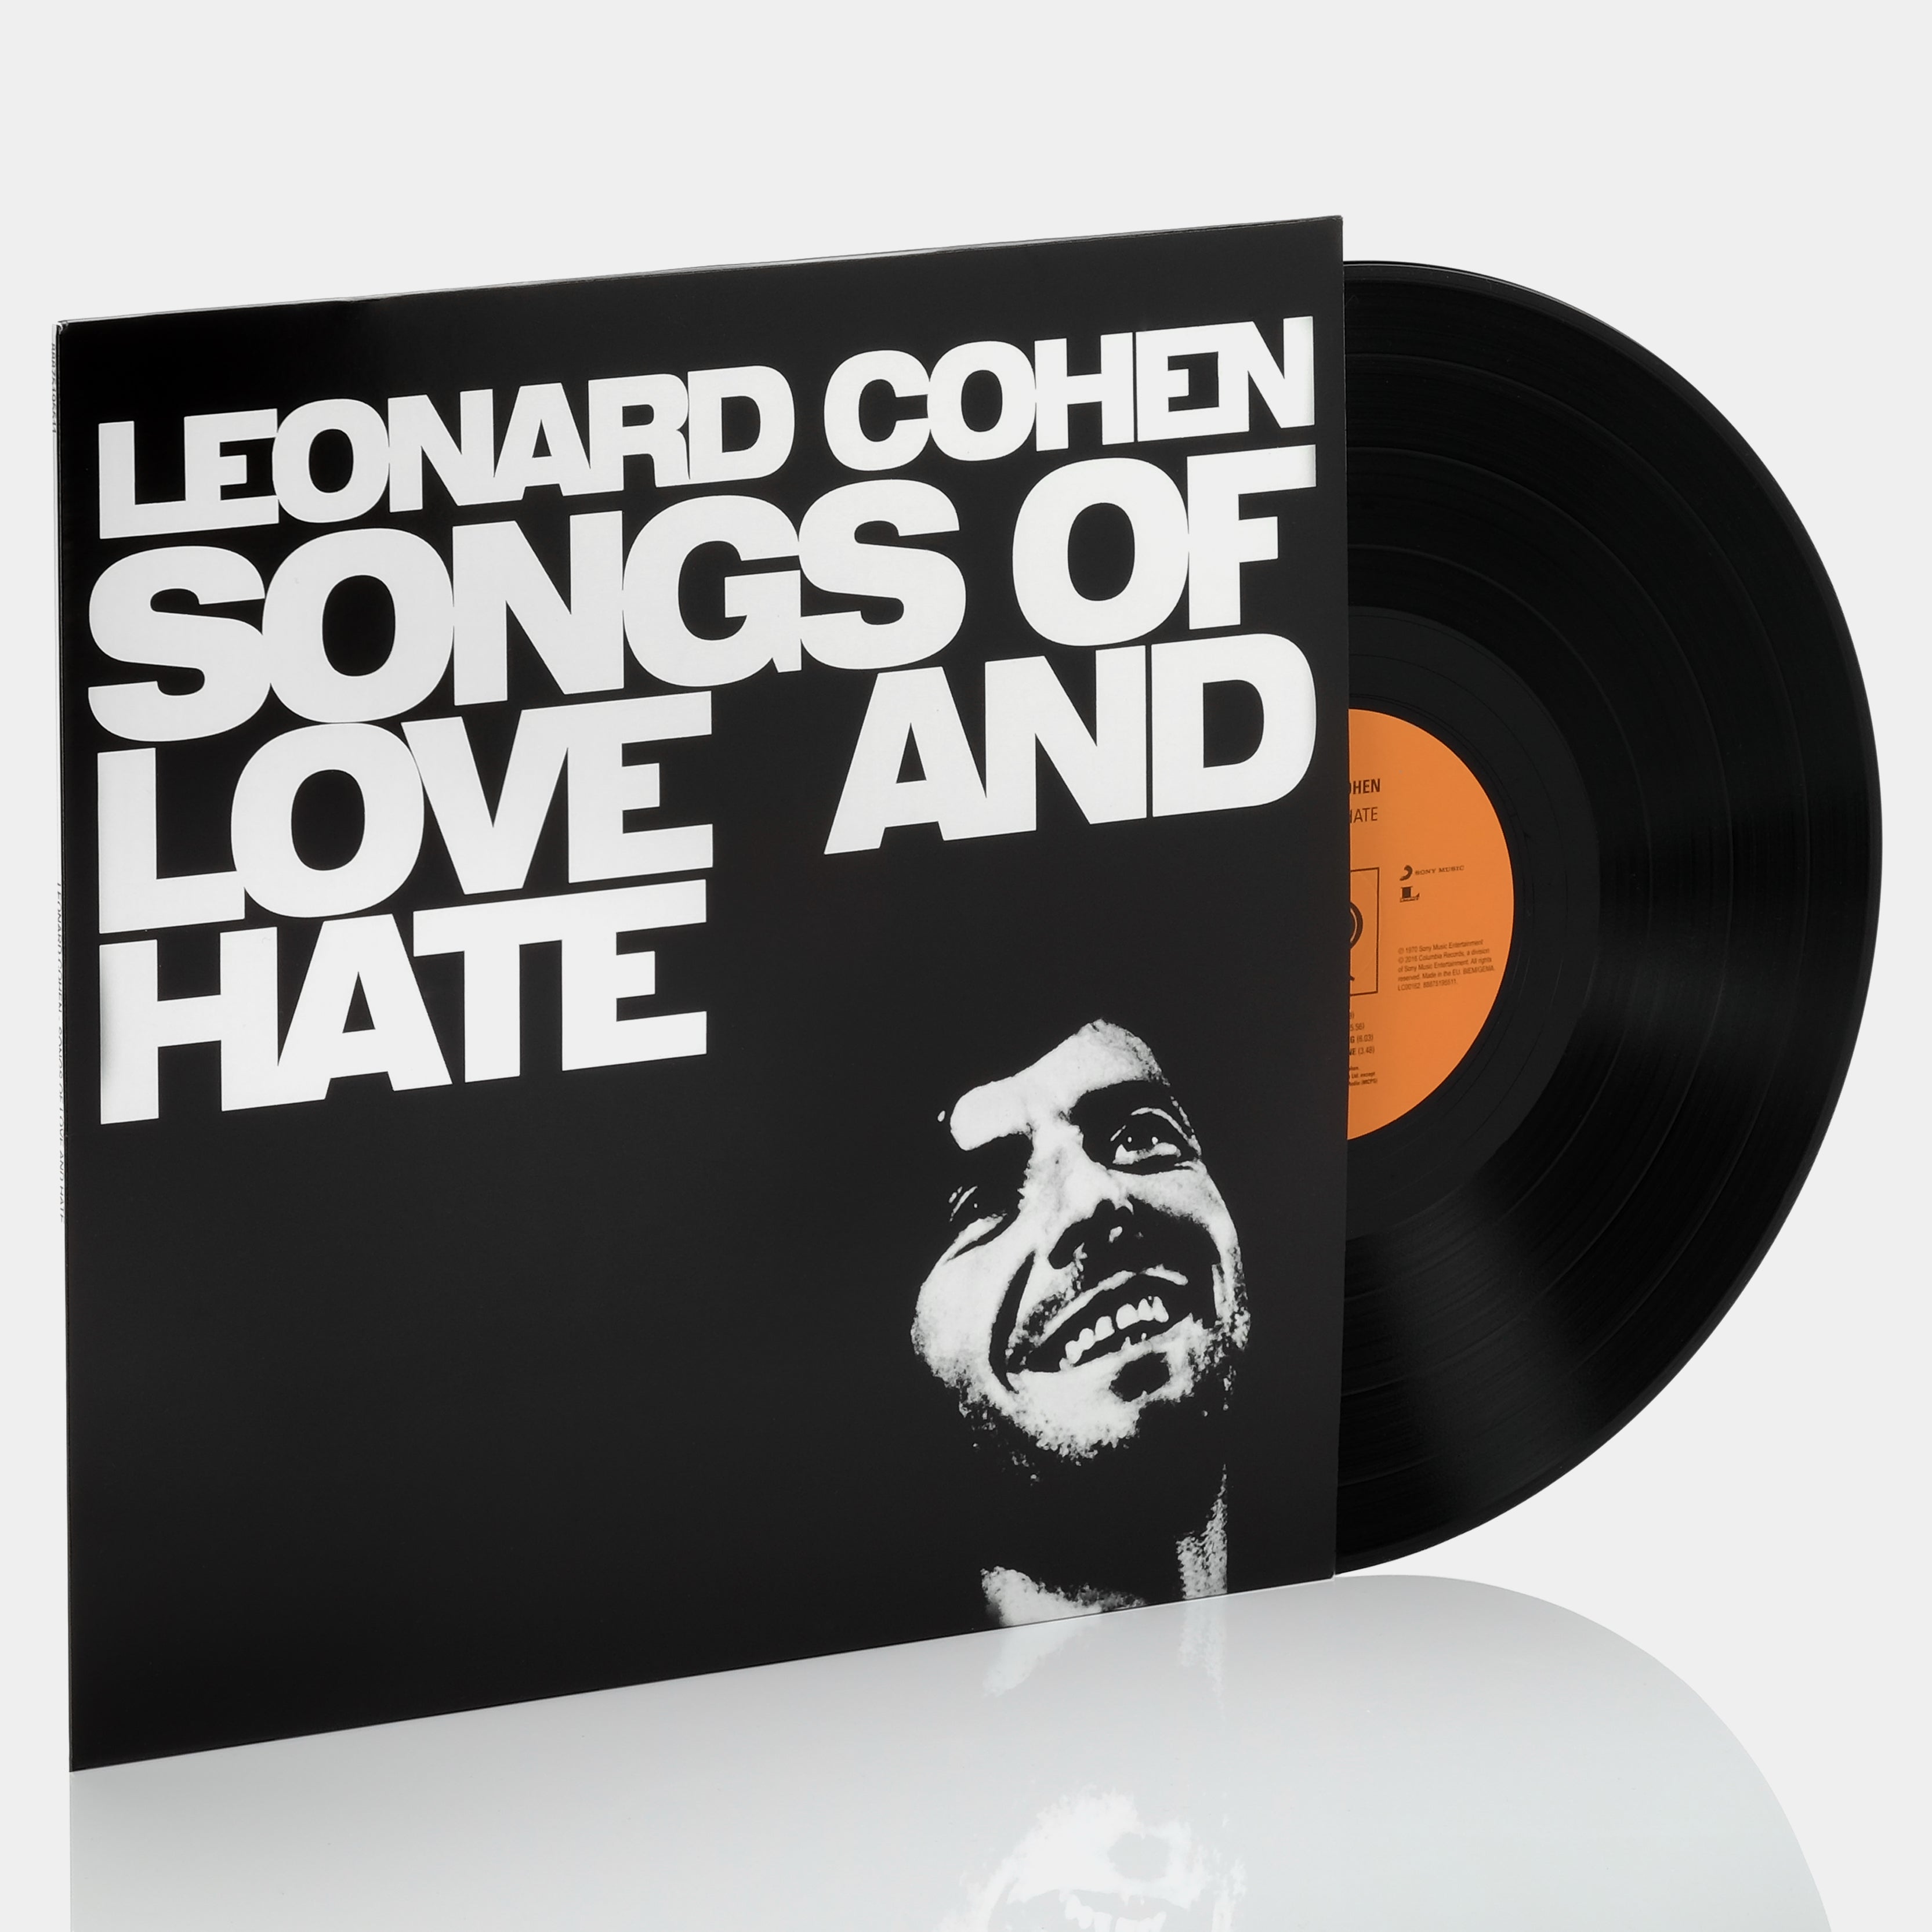 Leonard Cohen - Songs of Love and Hate LP Vinyl Record